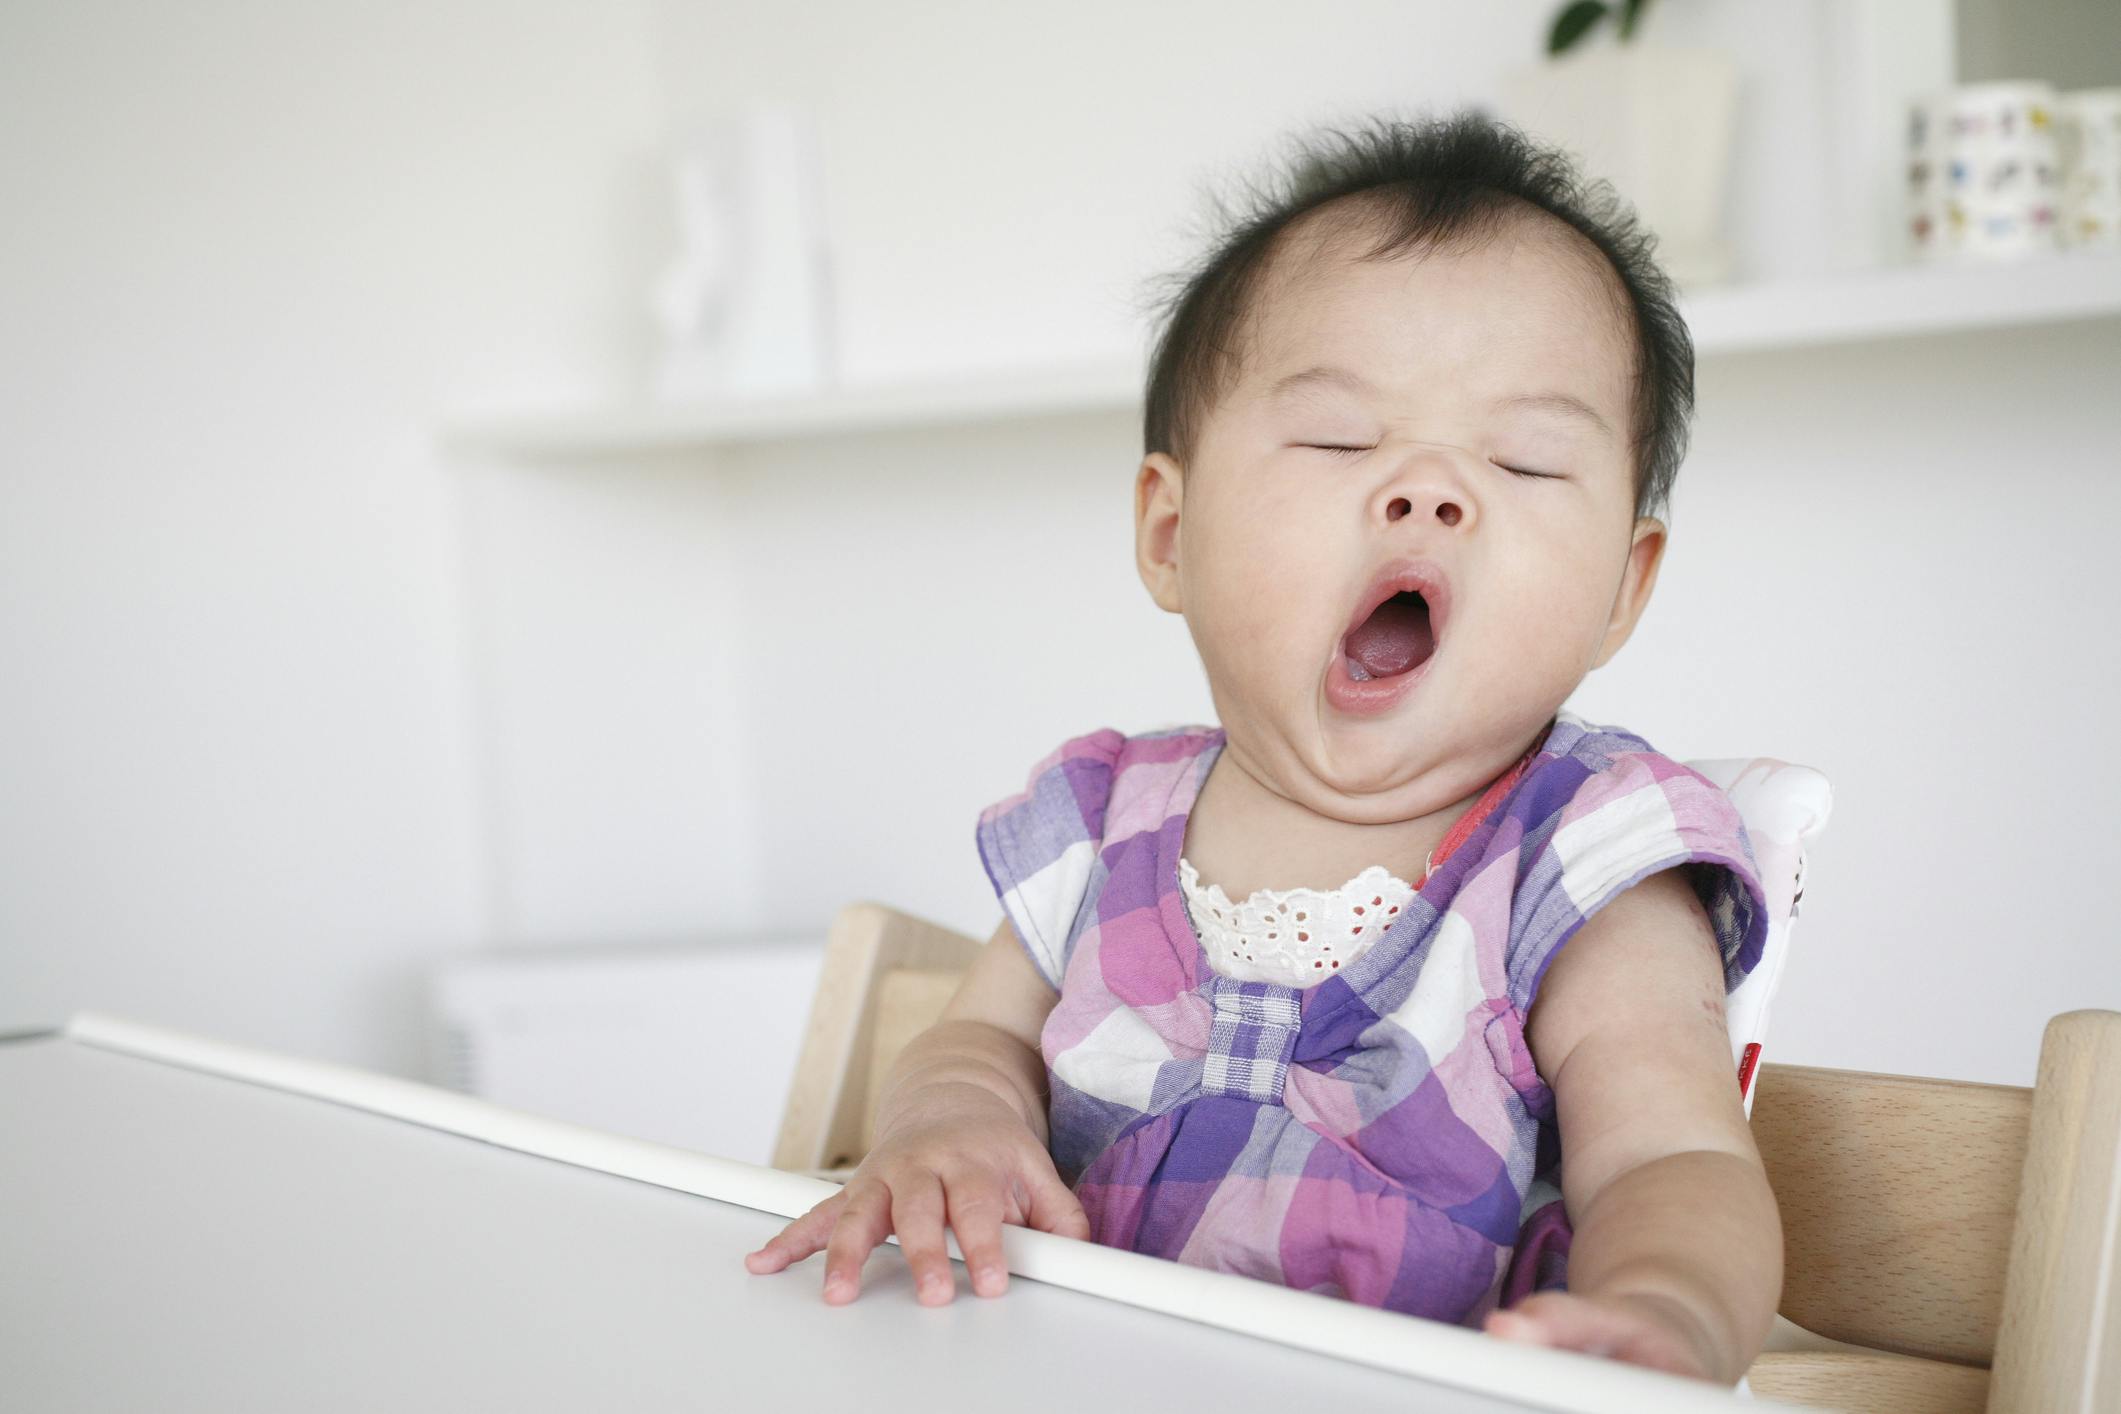 The Baby Names We're Totally Over